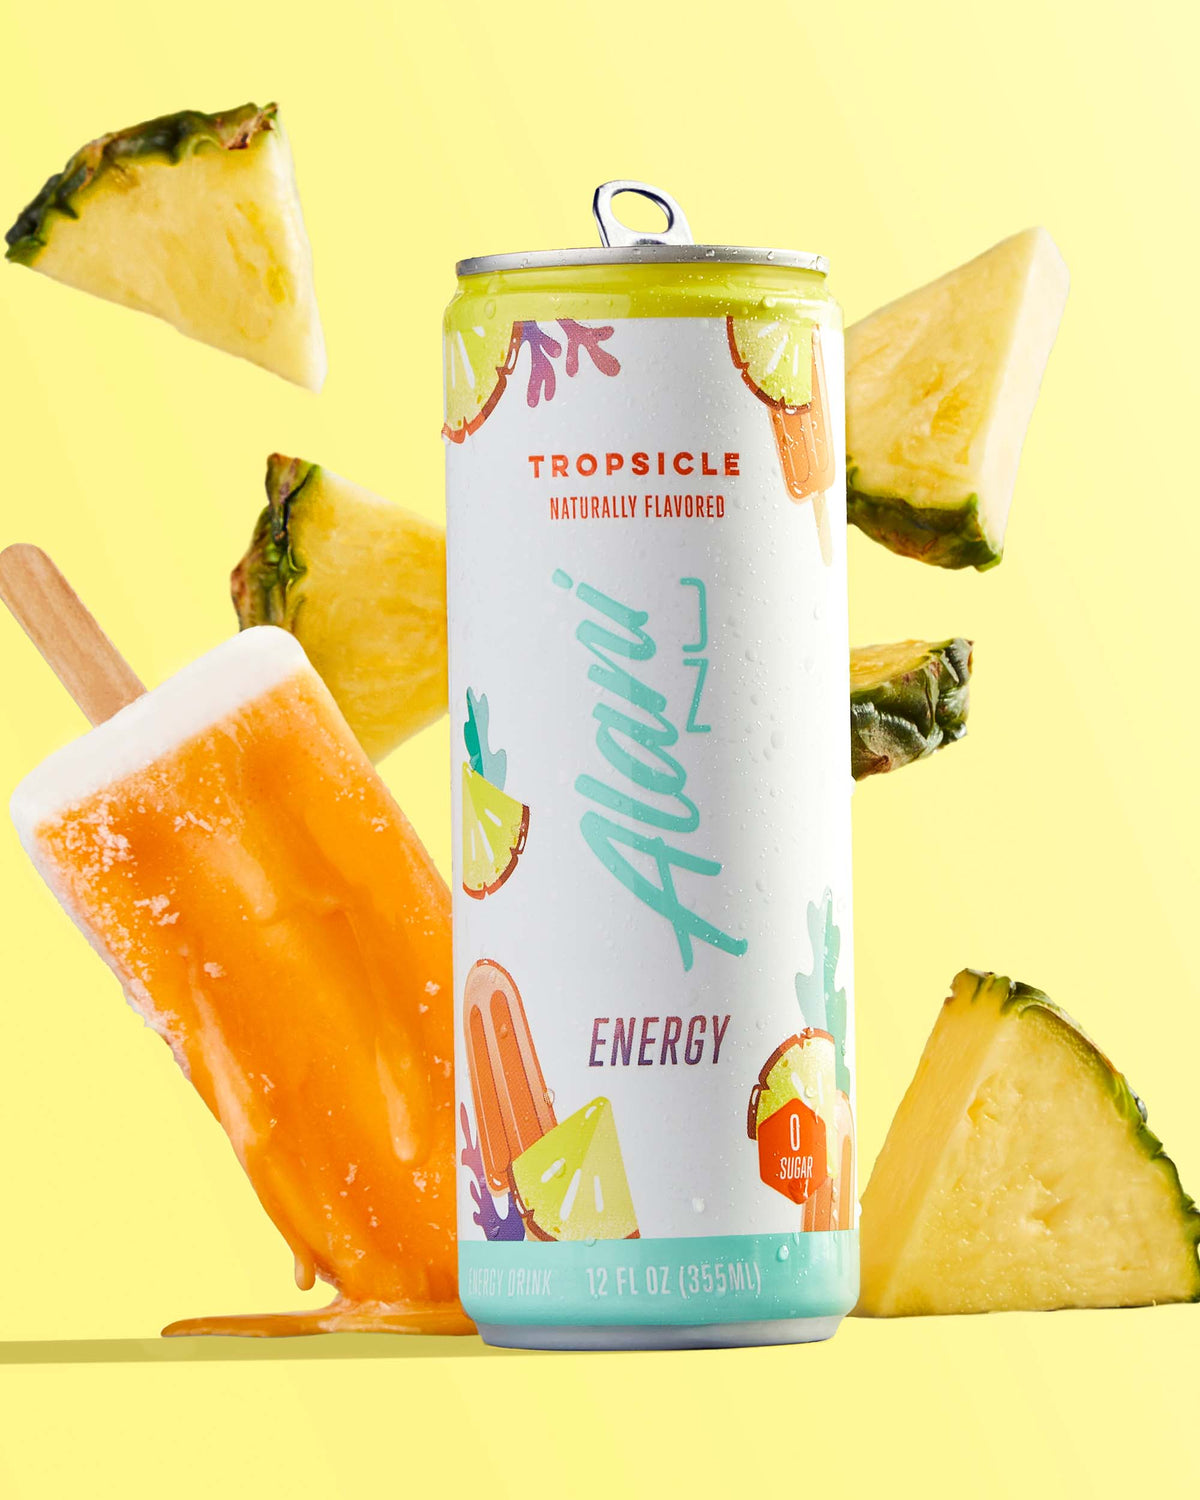 A 12 fl oz can of Alani Nu Tropsicle energy drink with a popsicle sticking out of it and pineapples.